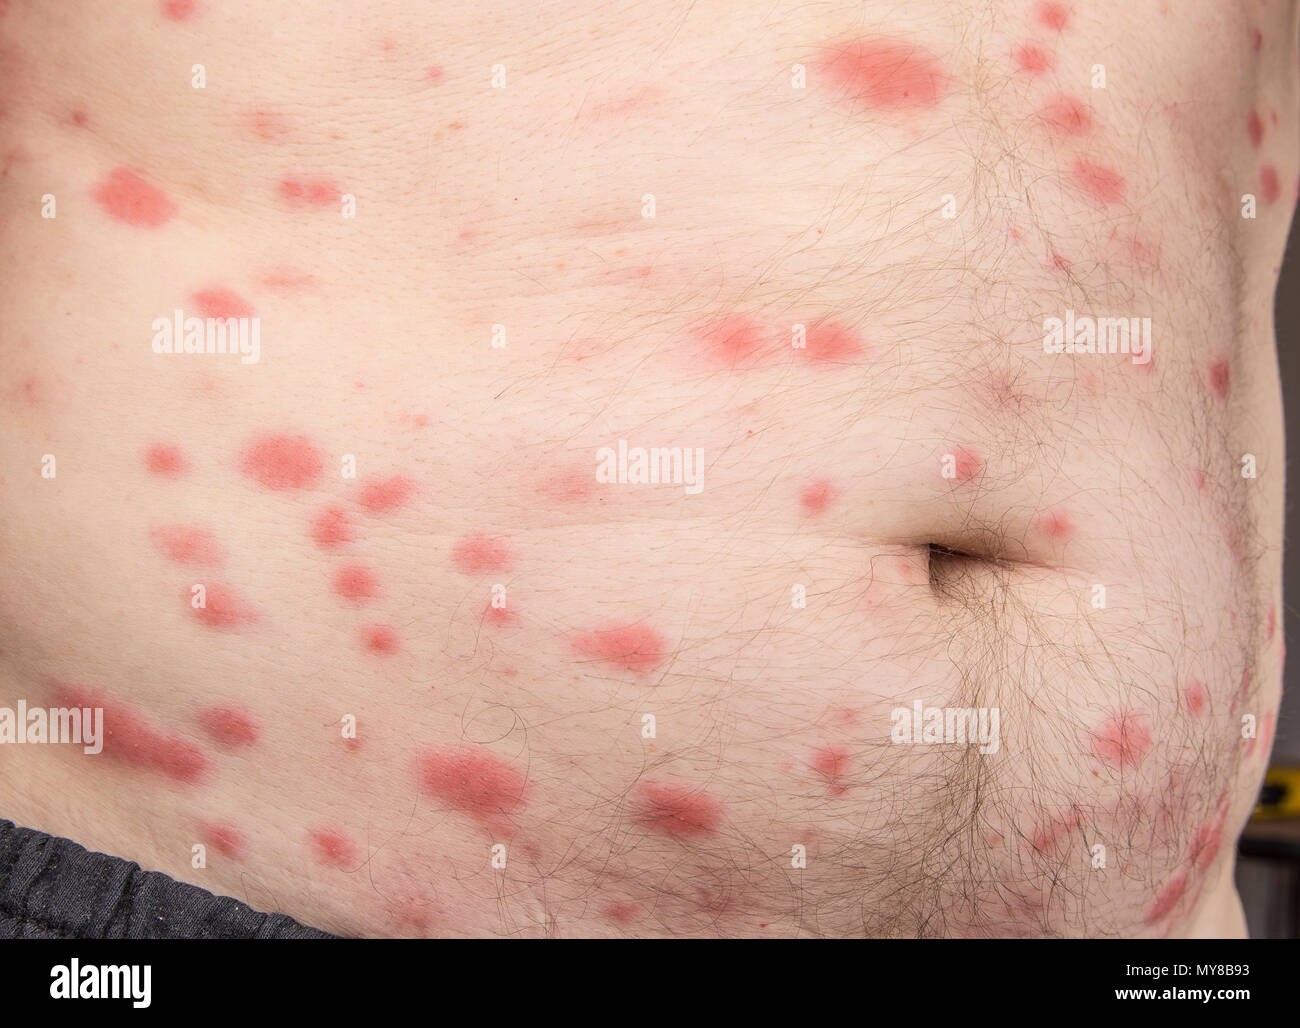 Bites Of Insect On Male Body Bed Bugs Or Flea Stock Photo Alamy